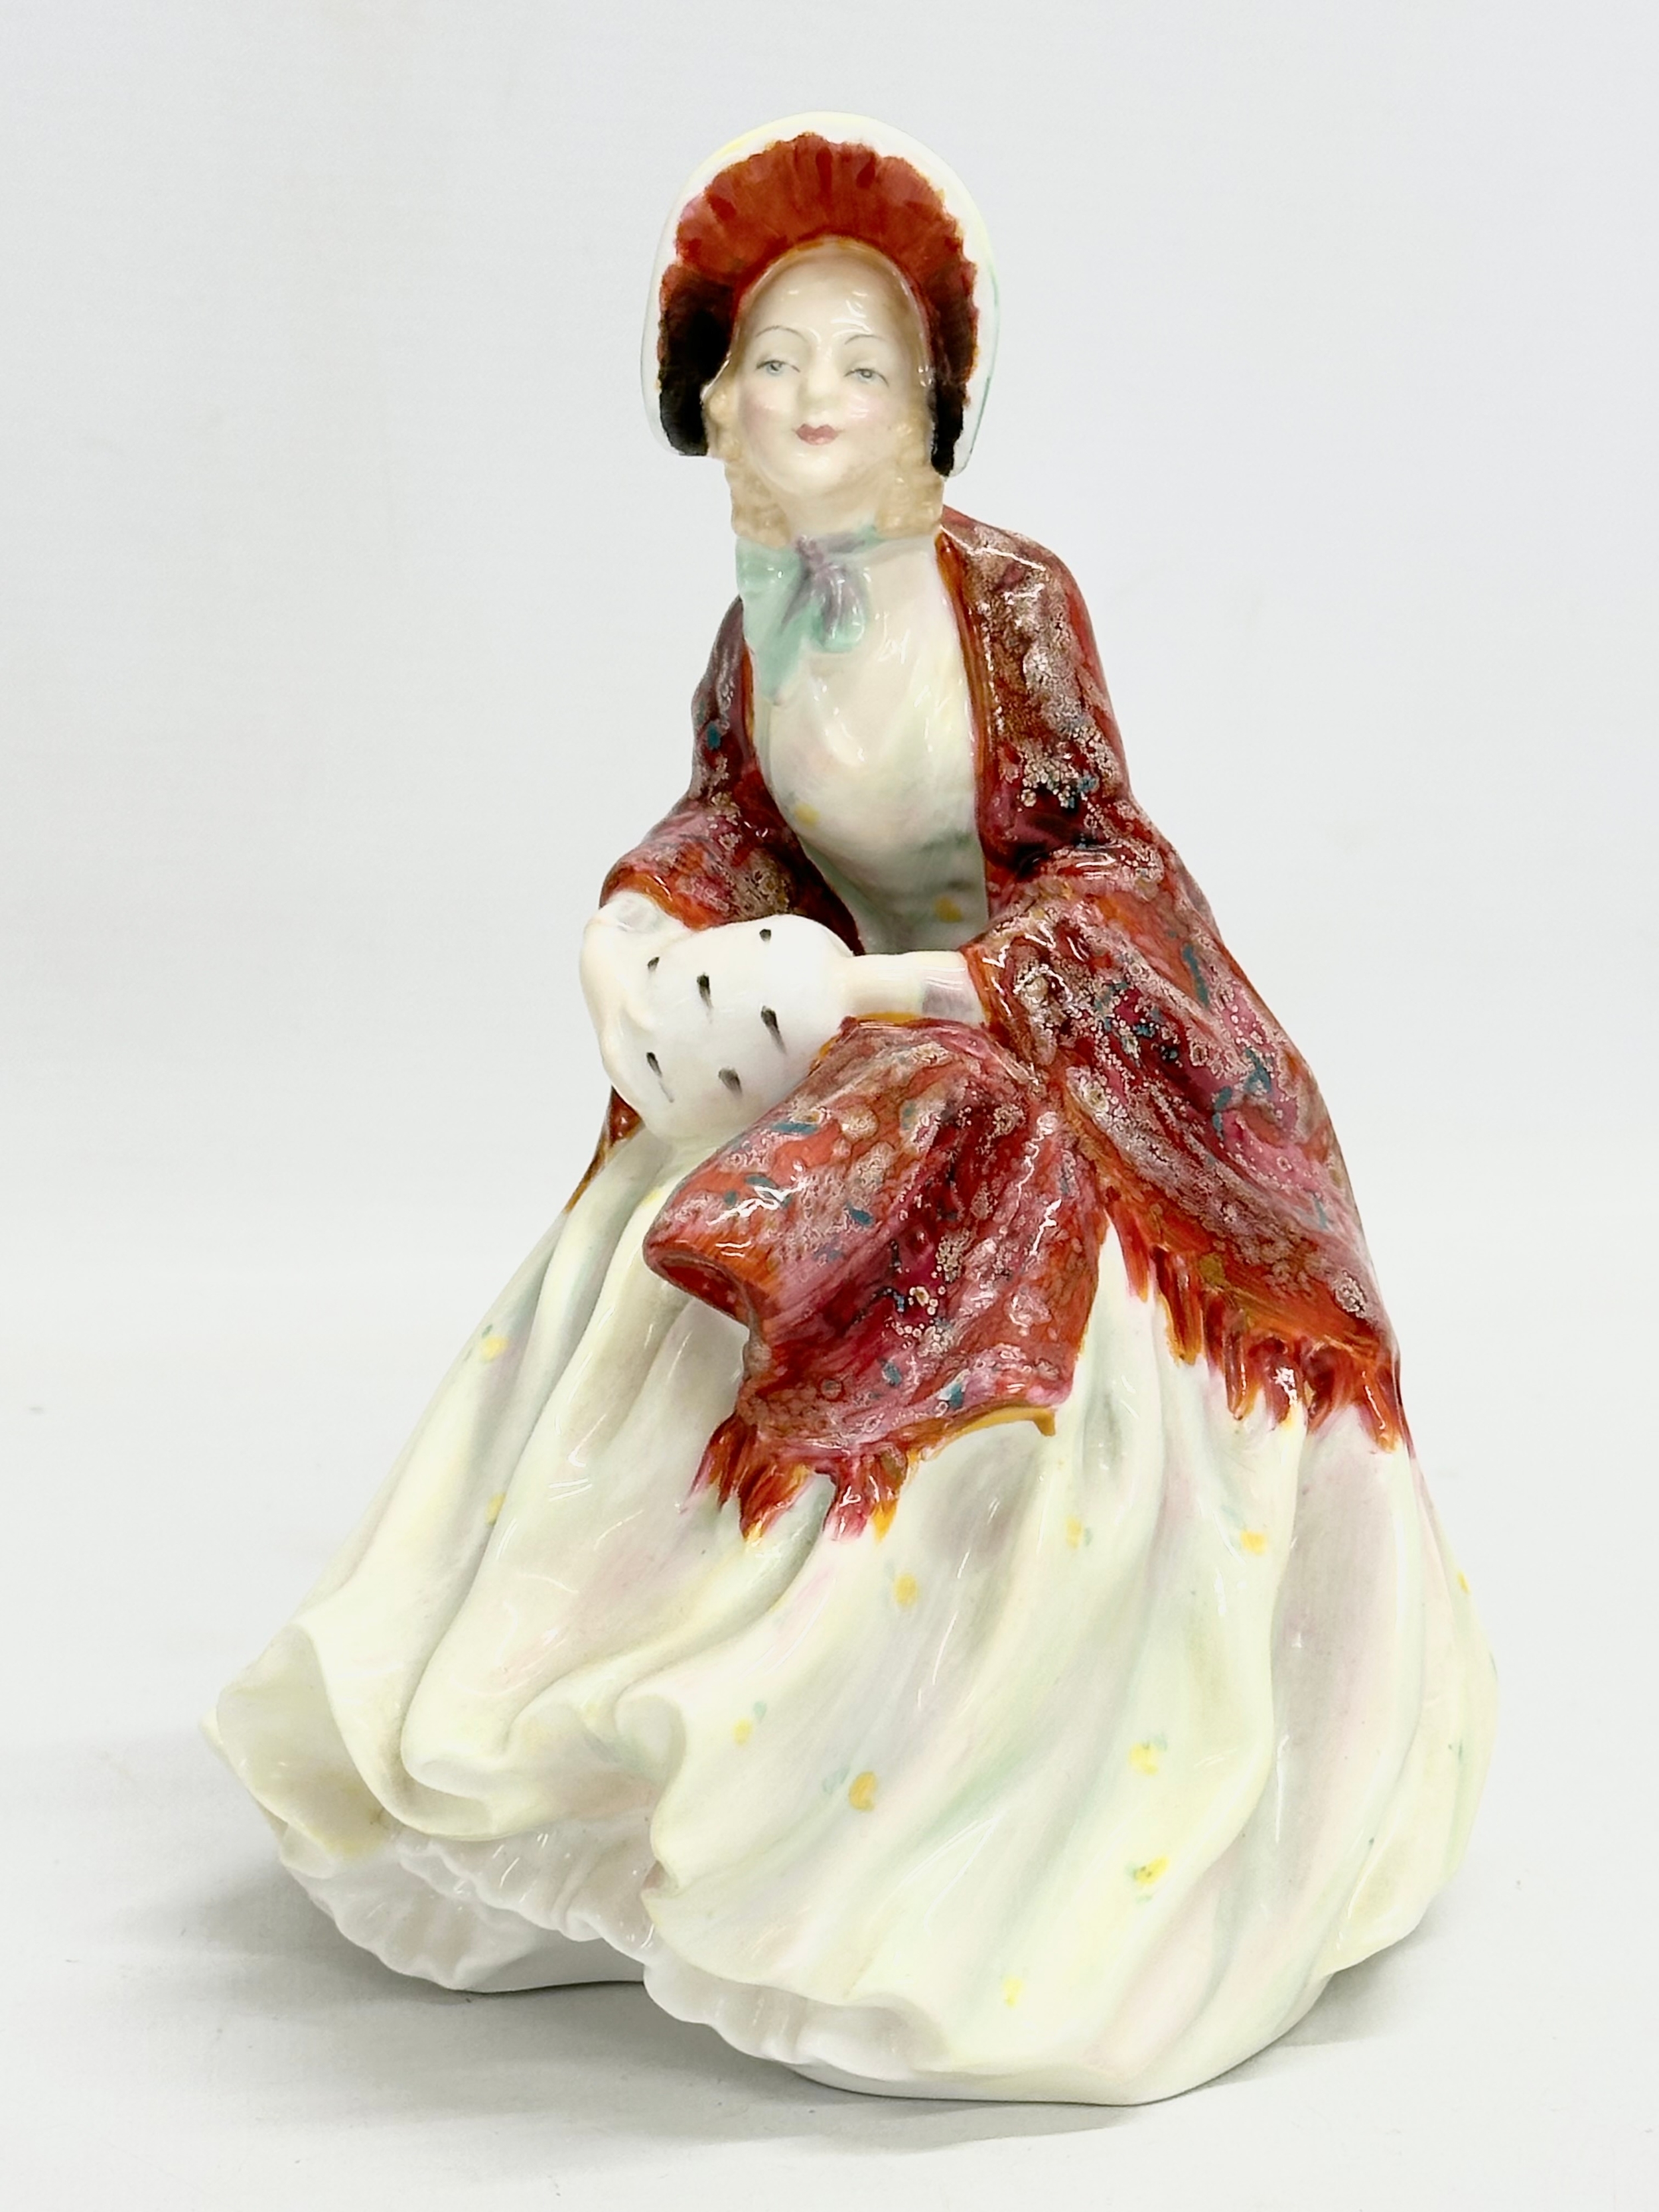 4 Royal Doulton figurines. Her Ladyship RN 842480. Top O’ The Hill, Denise, Pretty Ladies - Image 3 of 9